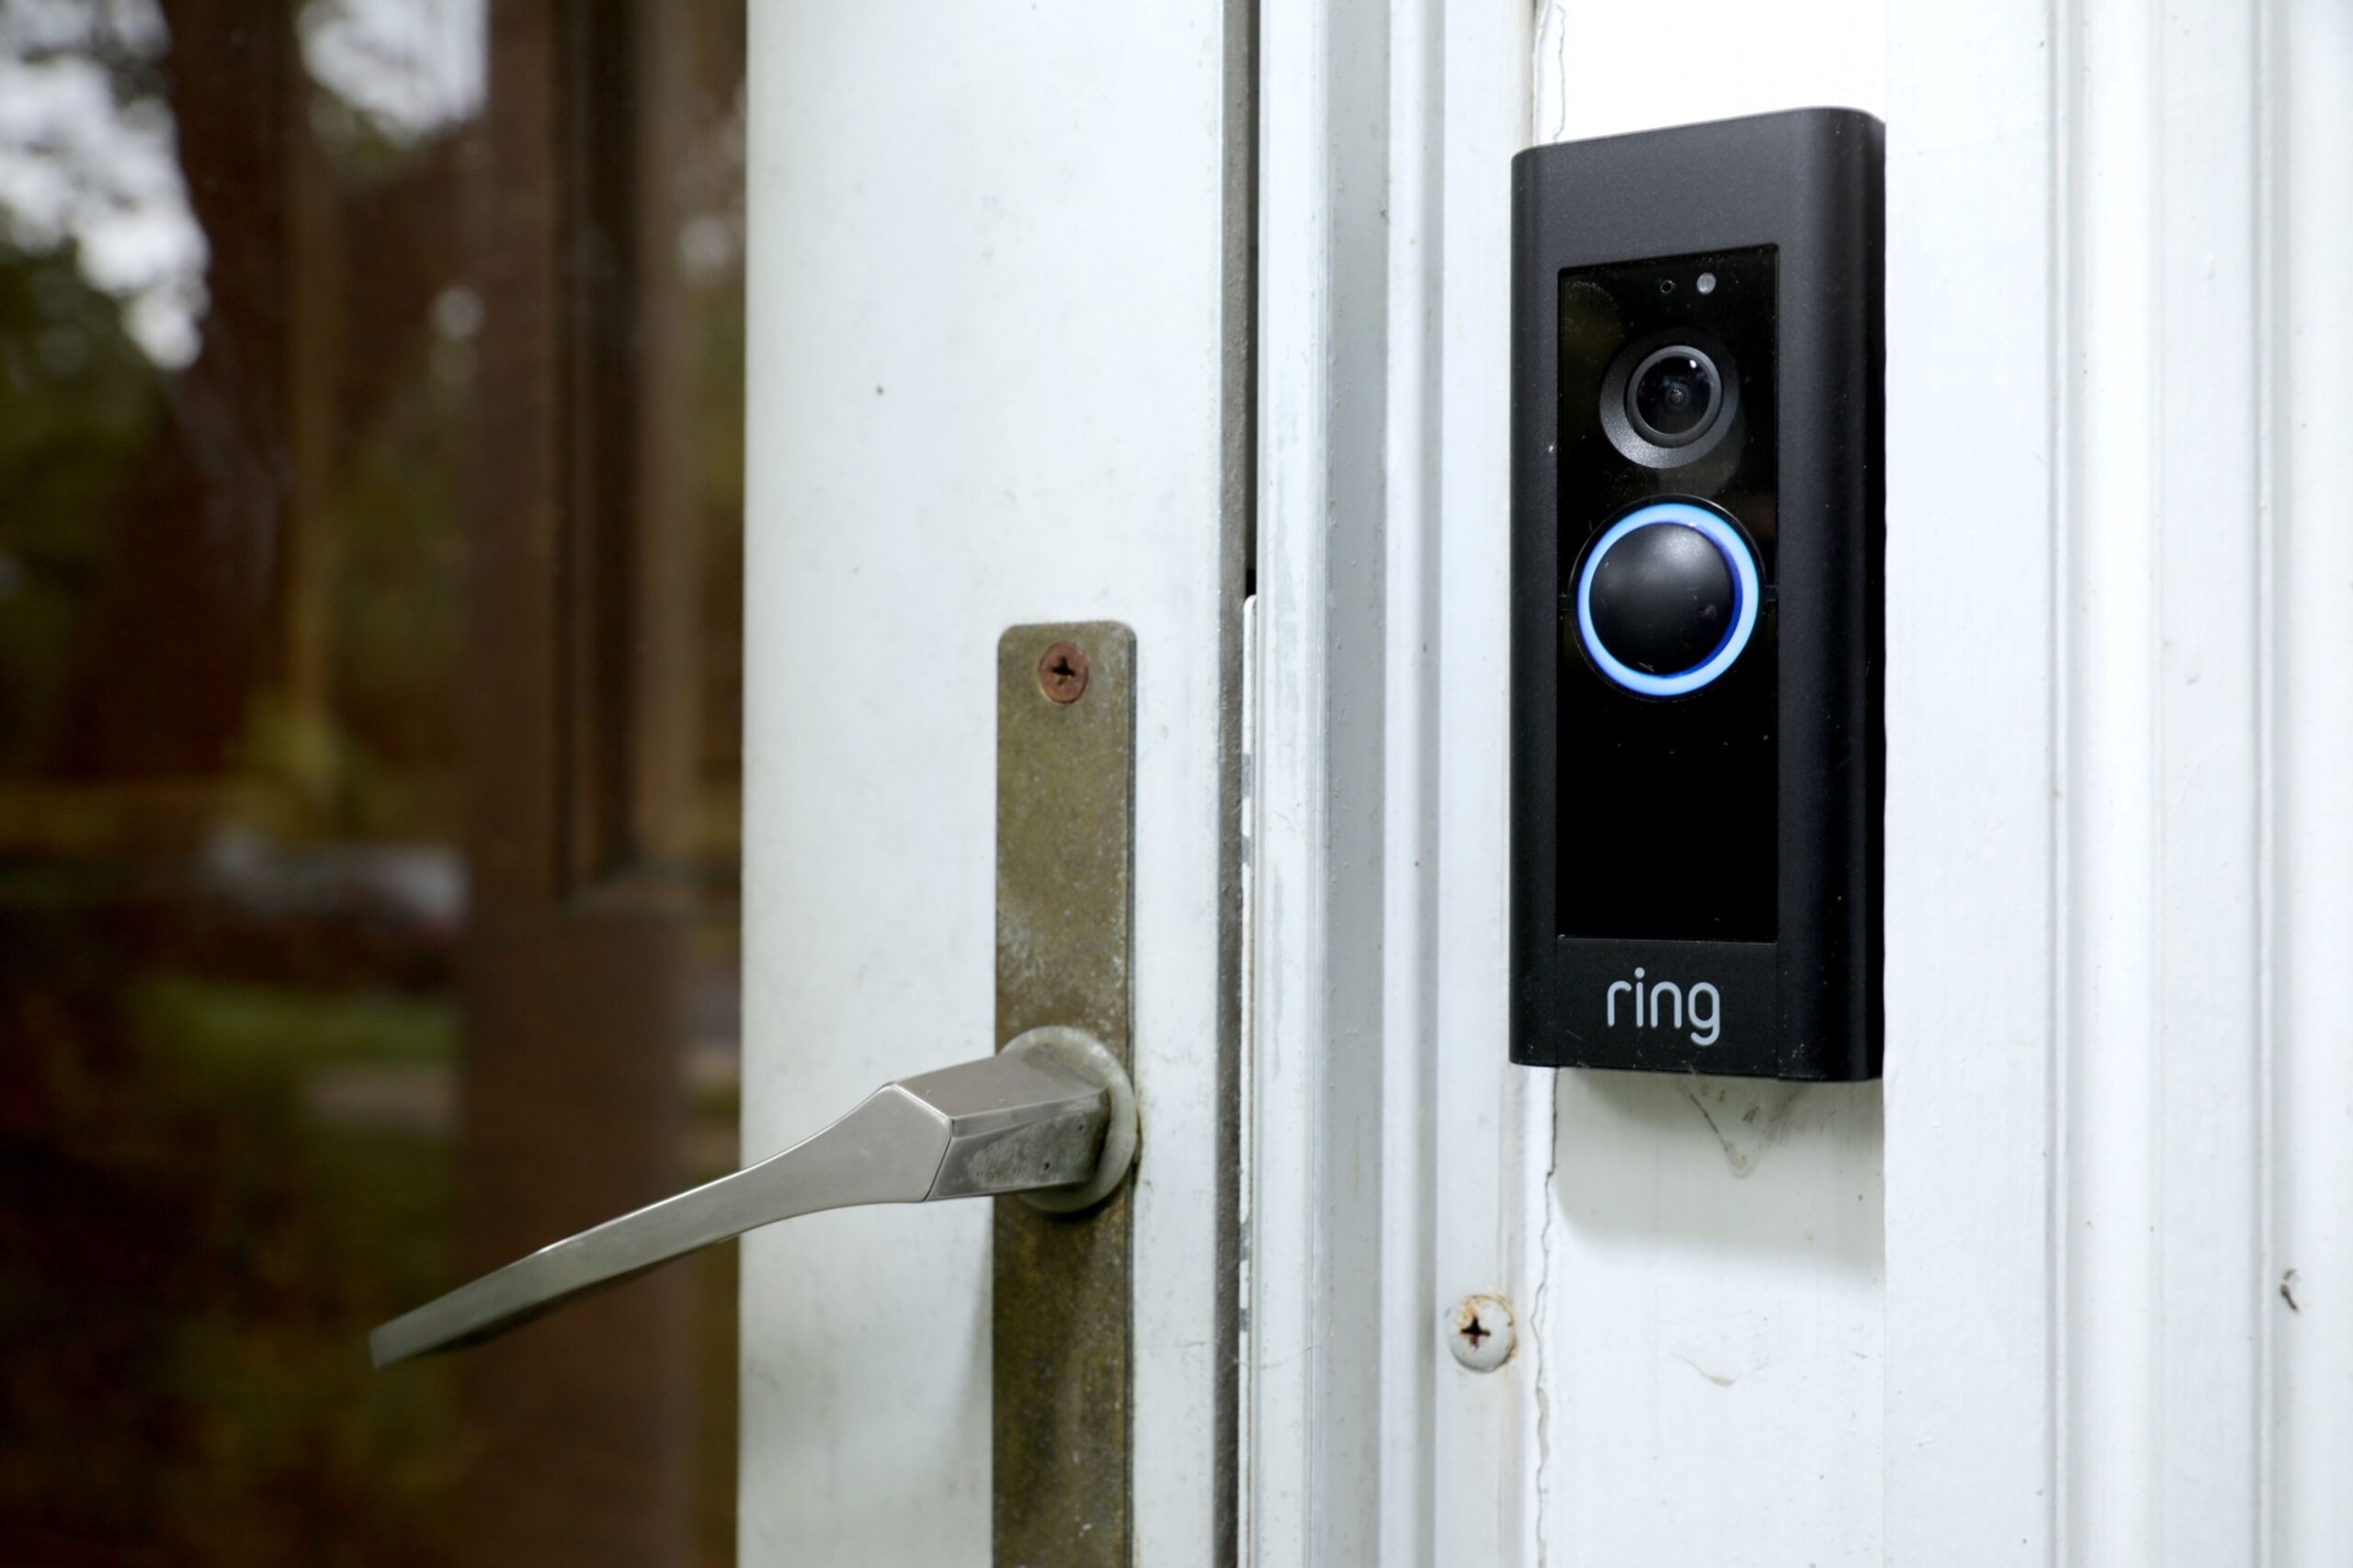 Amazon to Pay $30.8 Million to Settle FTC Privacy Claims Over Ring Doorbell